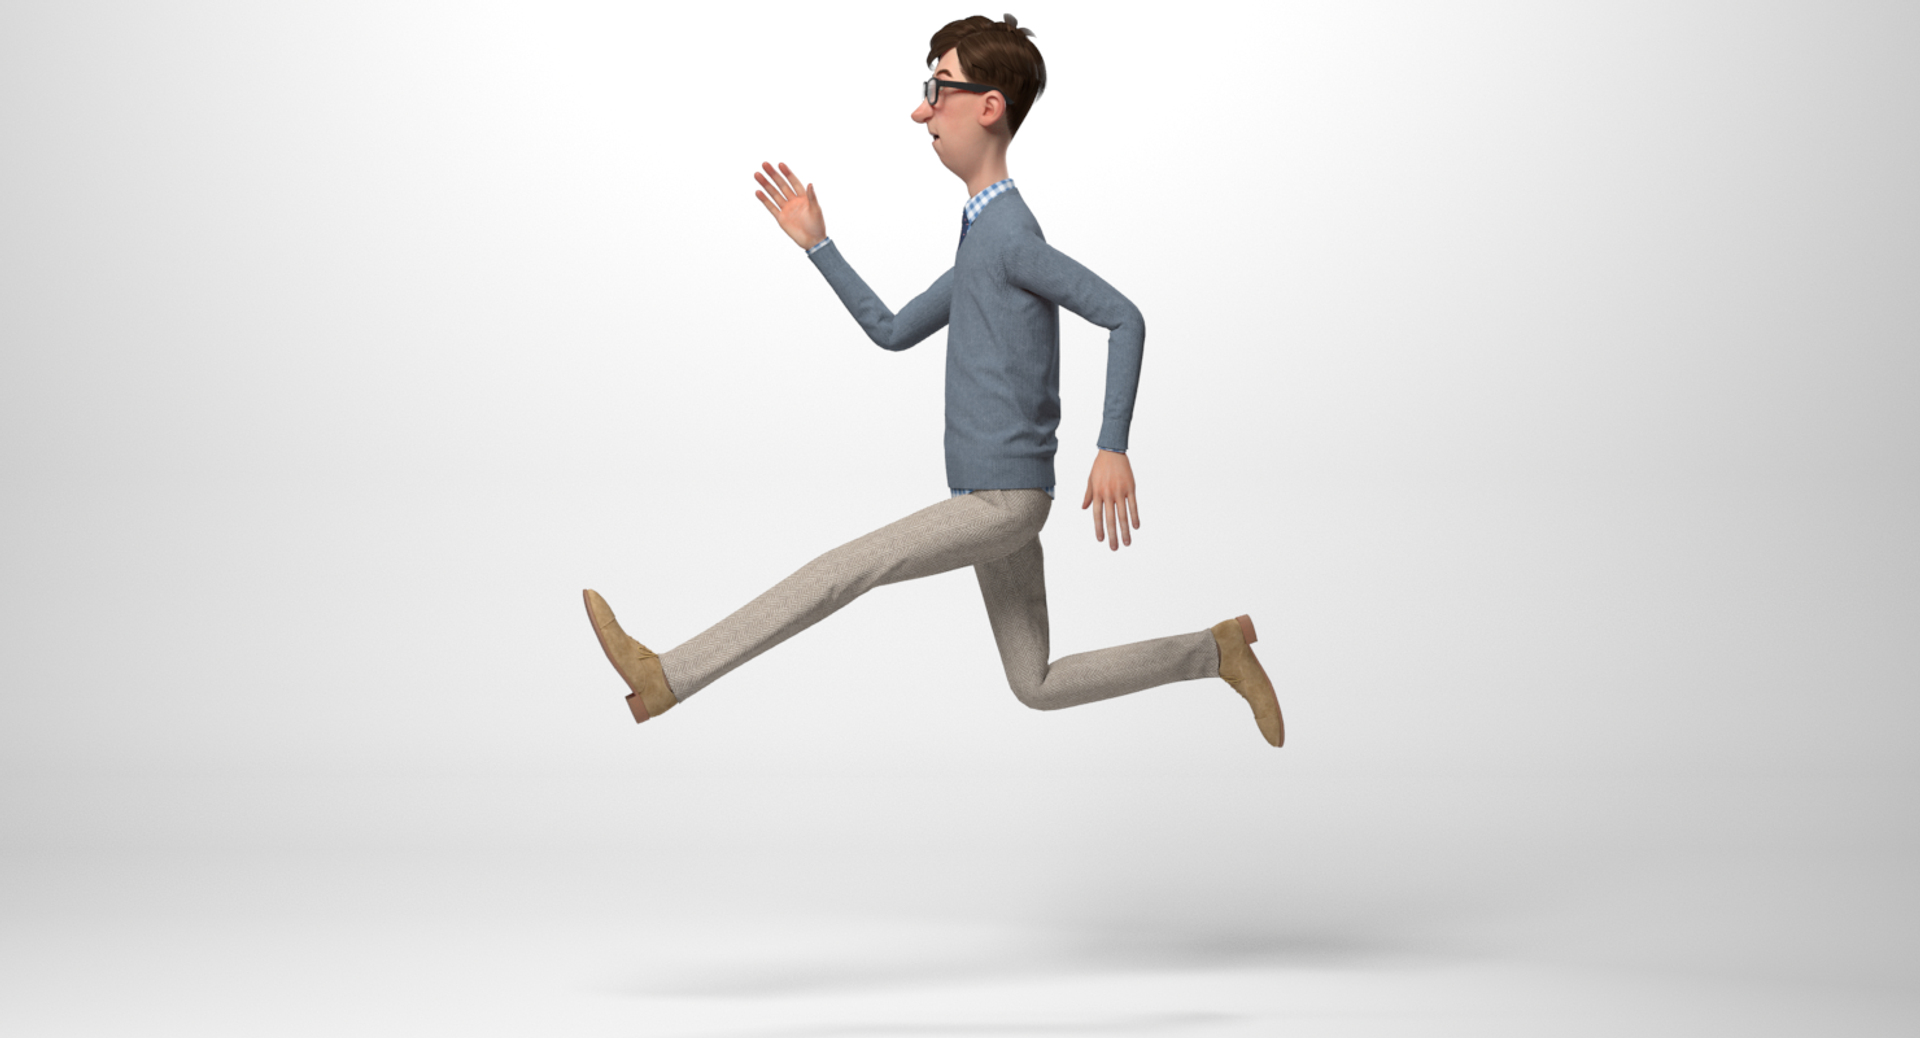 13,397 Walking Exercise Cartoon Images, Stock Photos, 3D objects